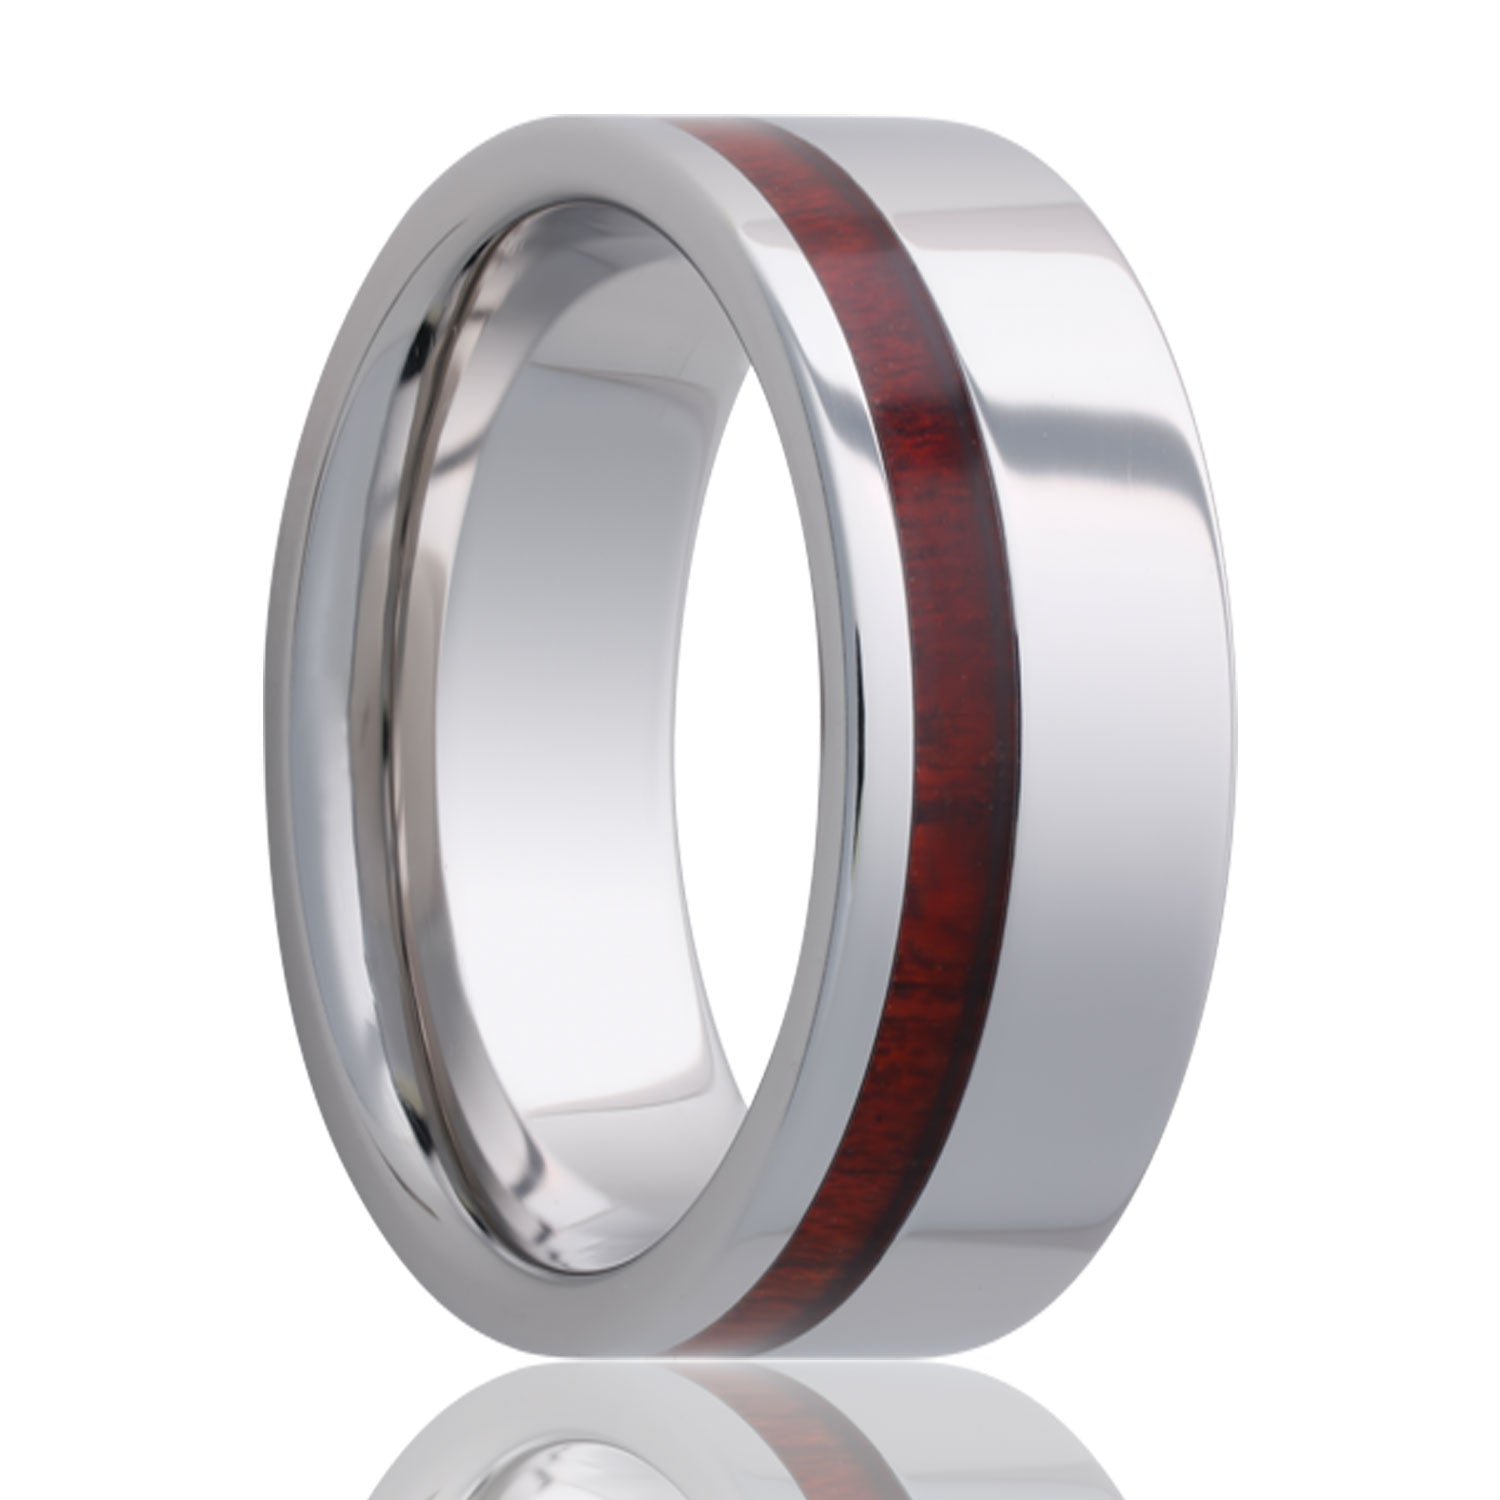 Blood Wood Inlaid Tungsten Wedding Band with Beveled Edges